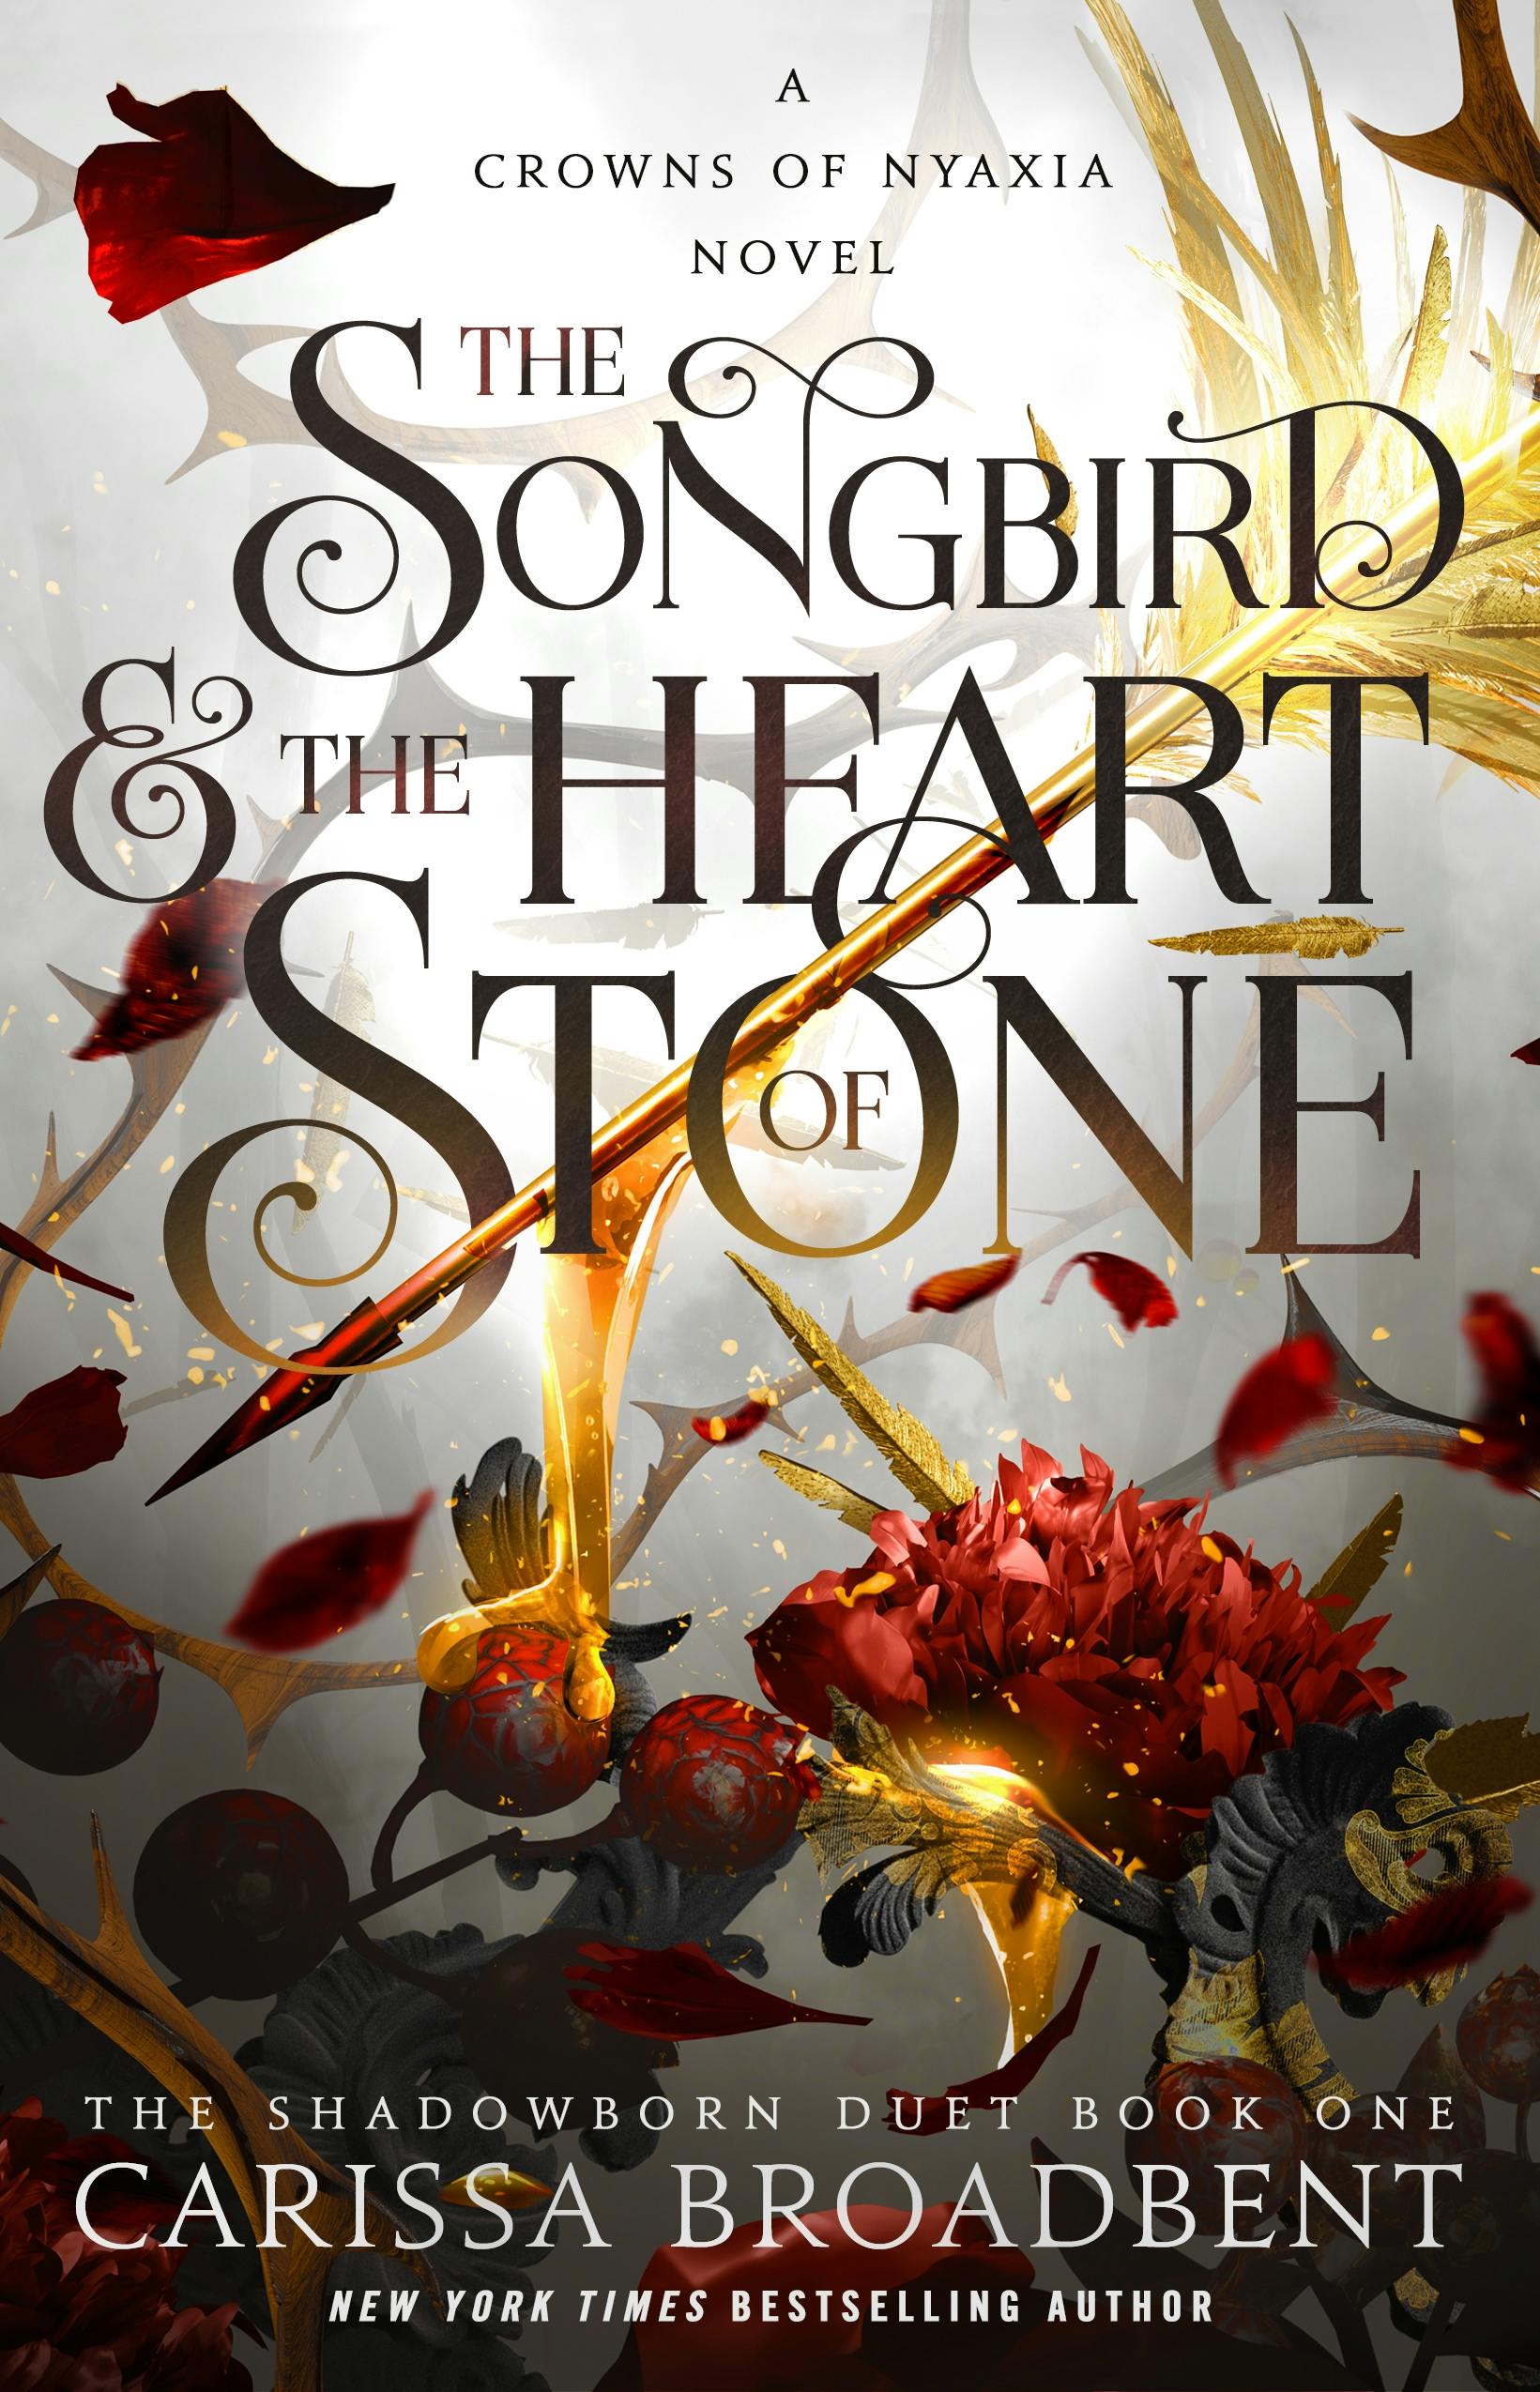 Cover for the book titled as: The Songbird & the Heart of Stone